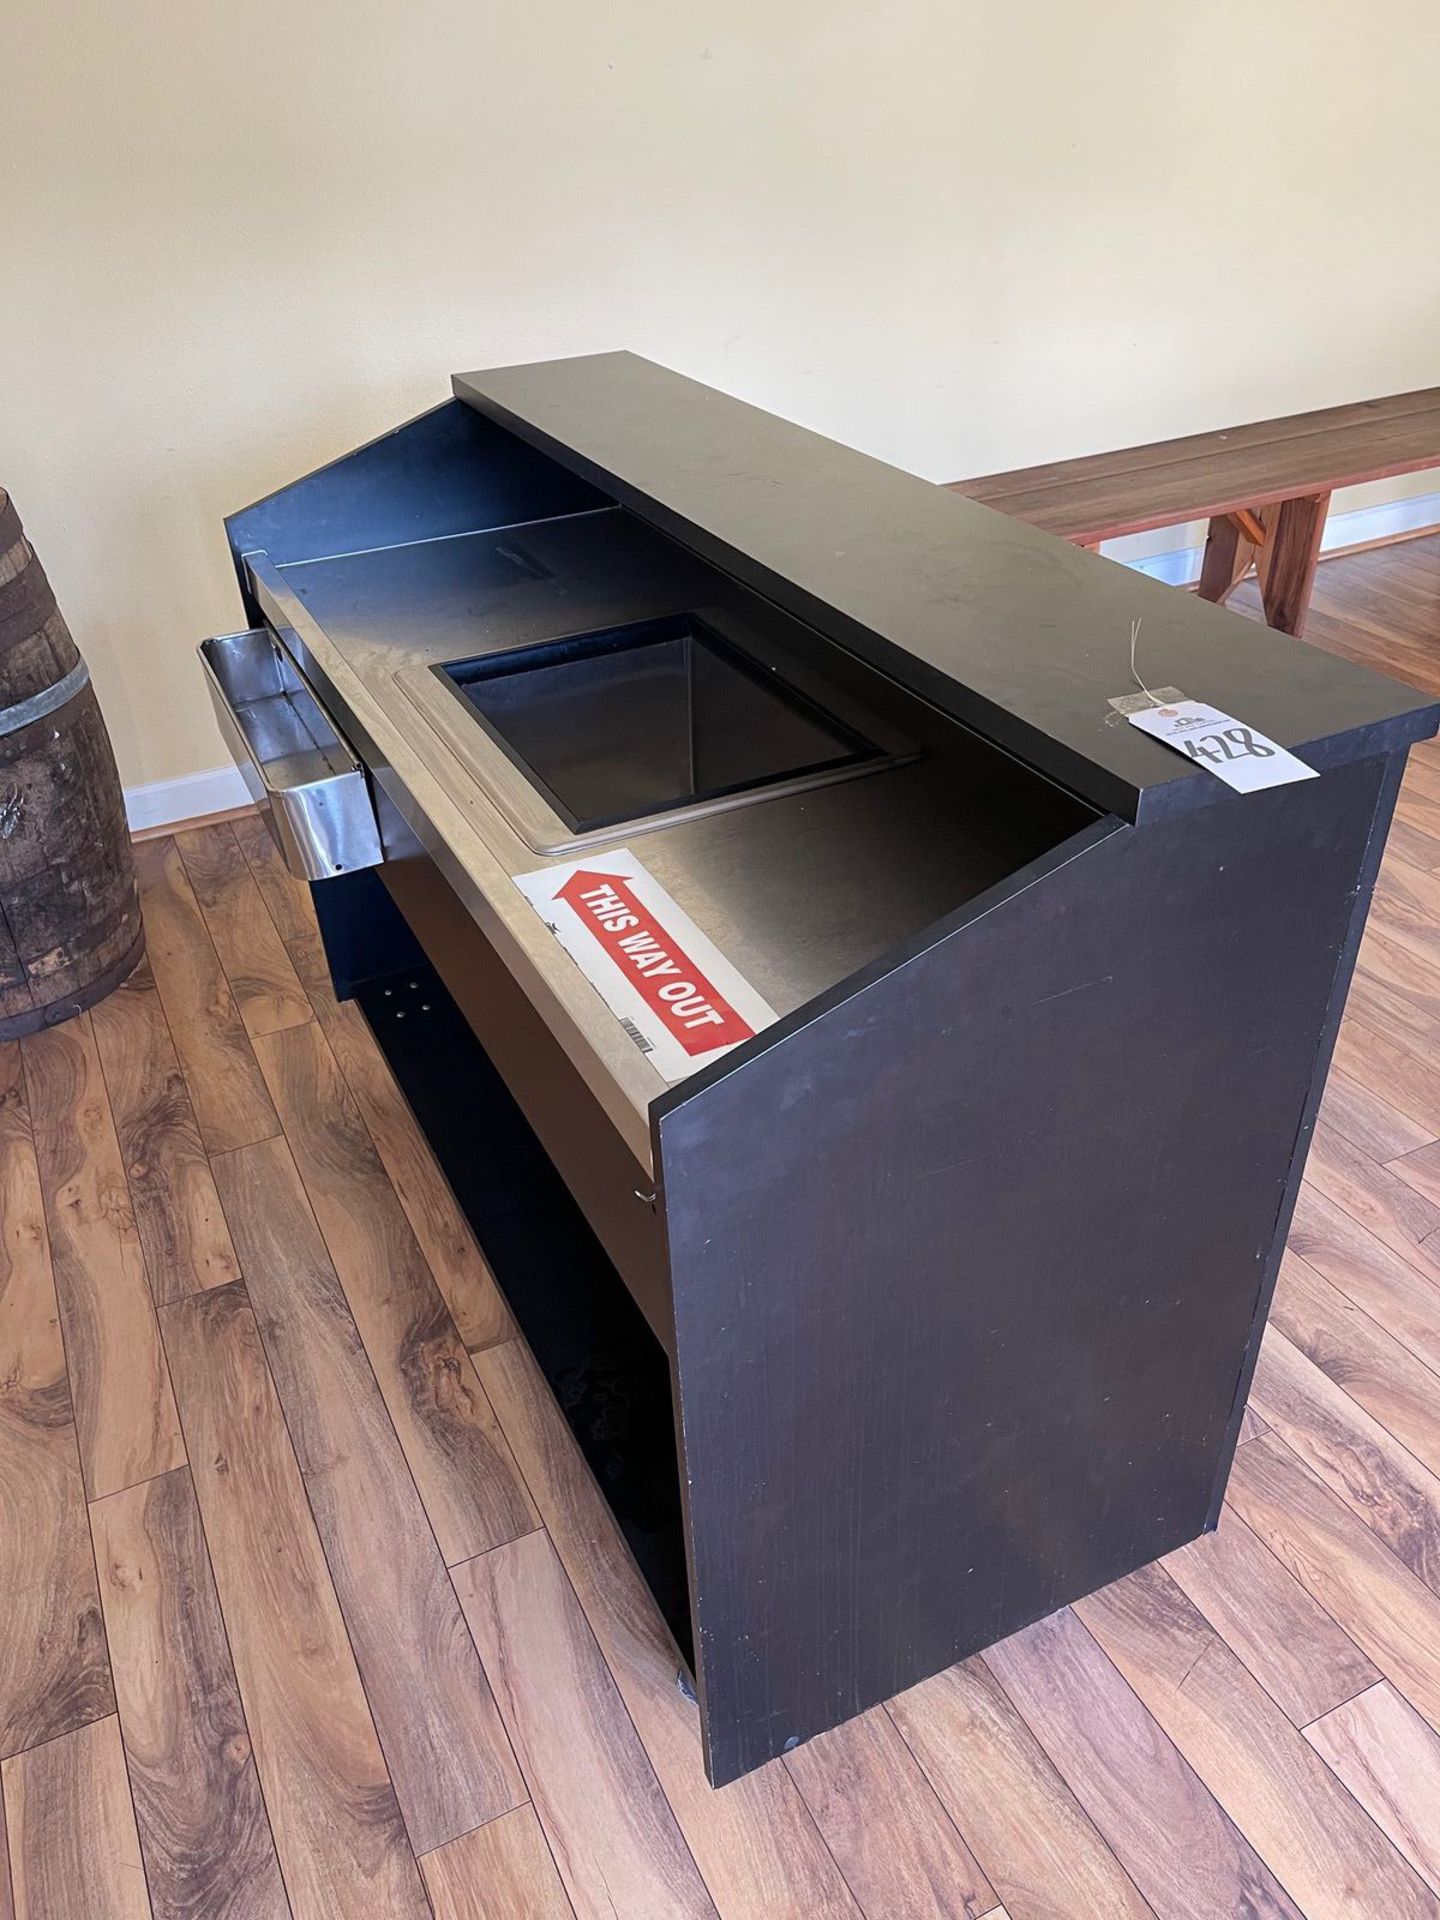 PORTABLE BAR WITH ICE BIN(13"X18"), SPEED RACK AND SS COUNTERTOP, 25"X61" | Rig Fee: 100 - Image 2 of 3